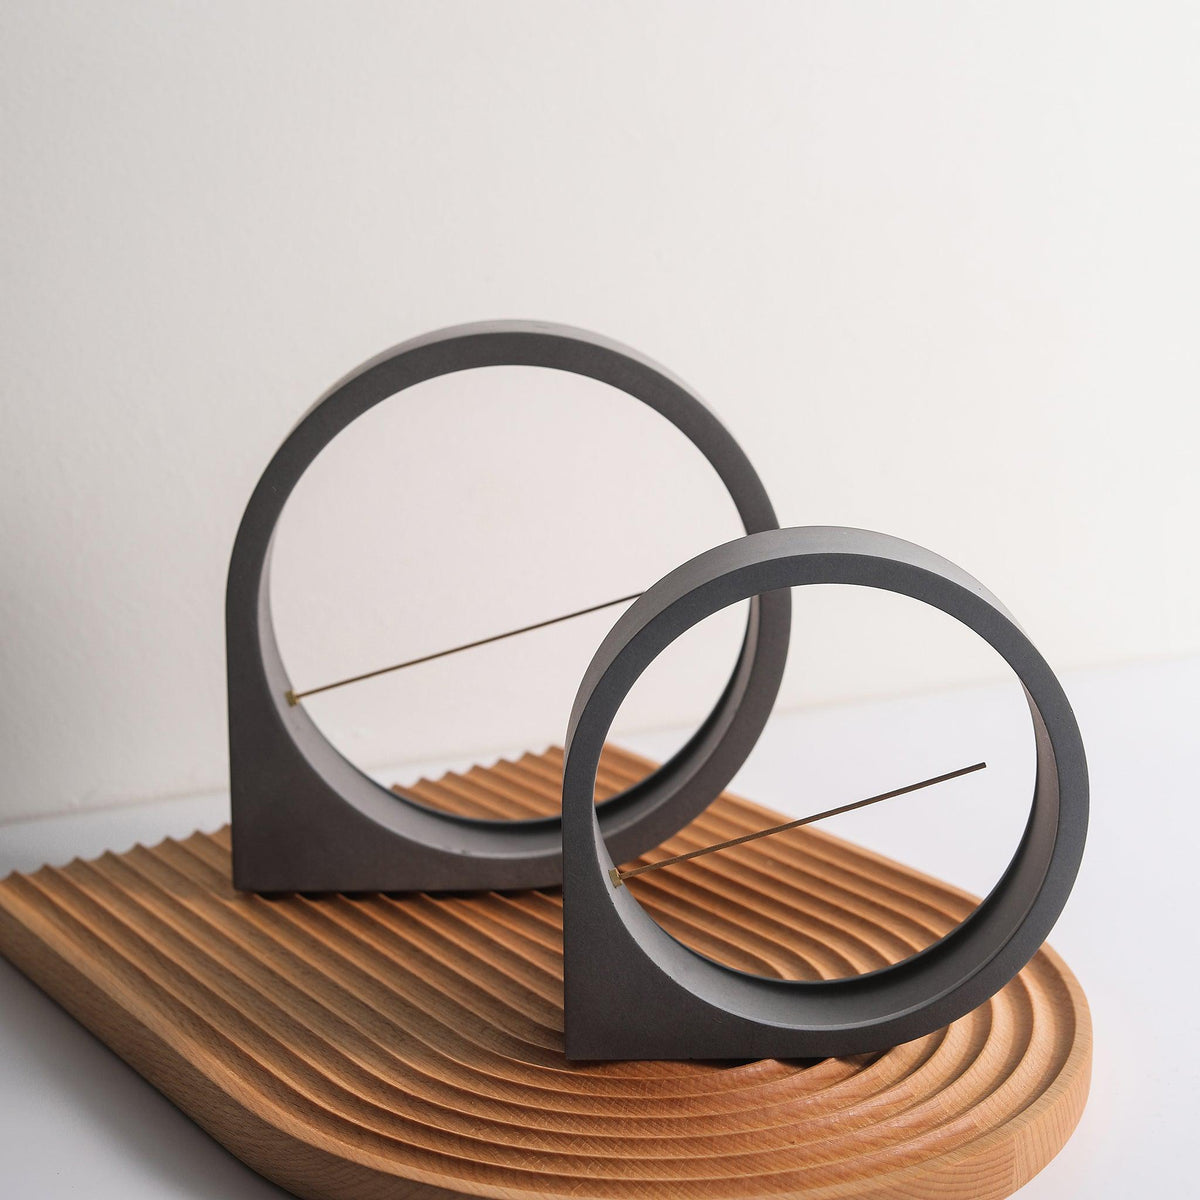 Moon incense burner by Kin Objects in two sizes